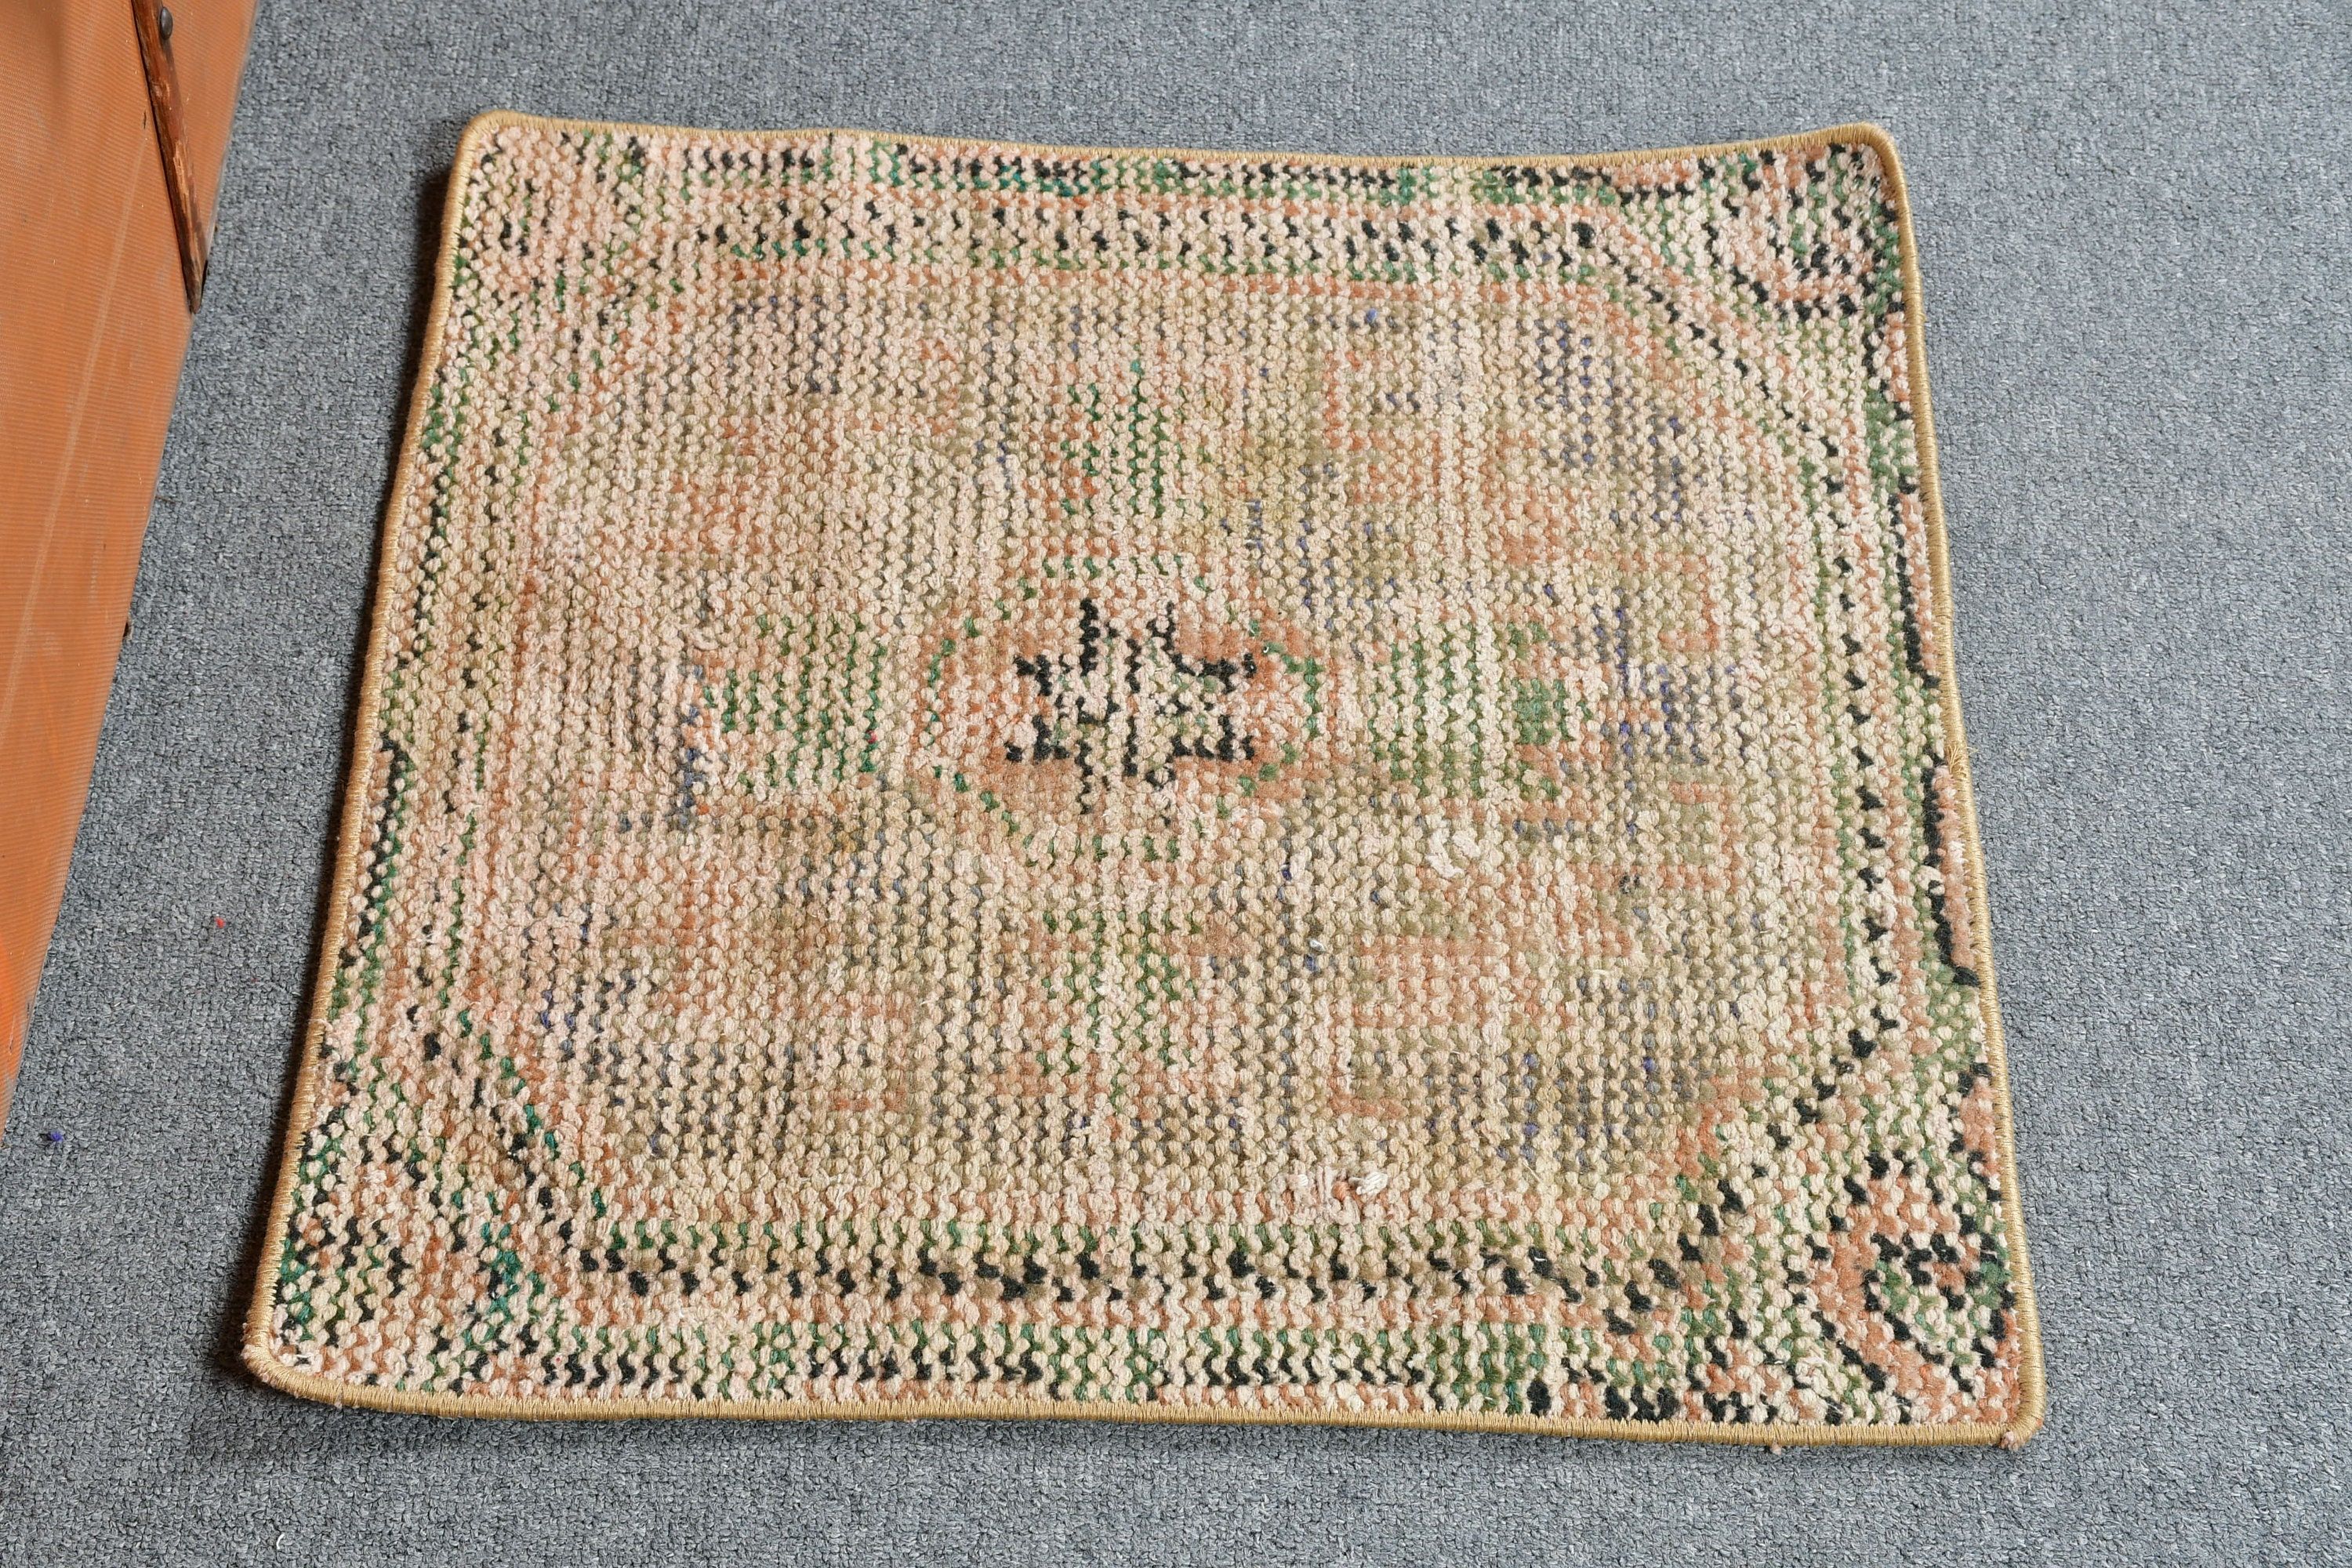 Entry Rug, Brown Oriental Rug, Floor Rugs, Kitchen Rug, Vintage Rugs, 1.8x1.8 ft Small Rug, Rugs for Kitchen, Turkish Rug